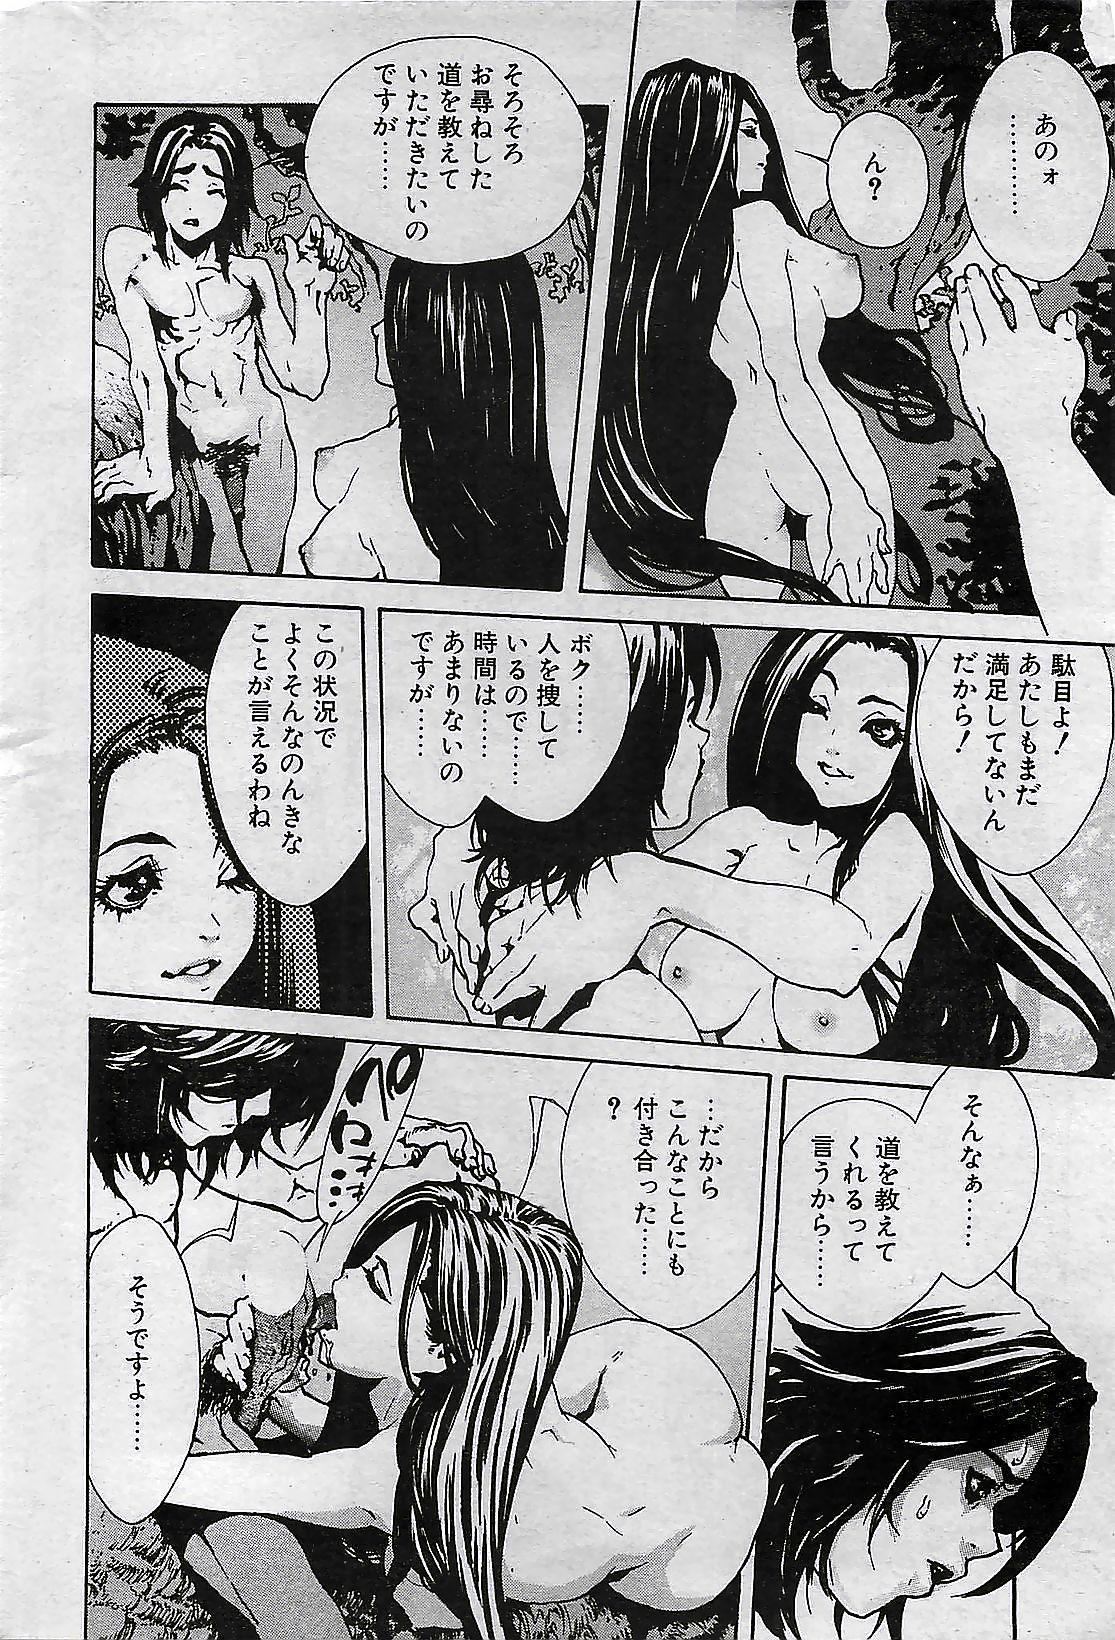 Real Amatuer Porn COMIC Penguin Club 2001-04 Vol. 176 Belly - Page 8